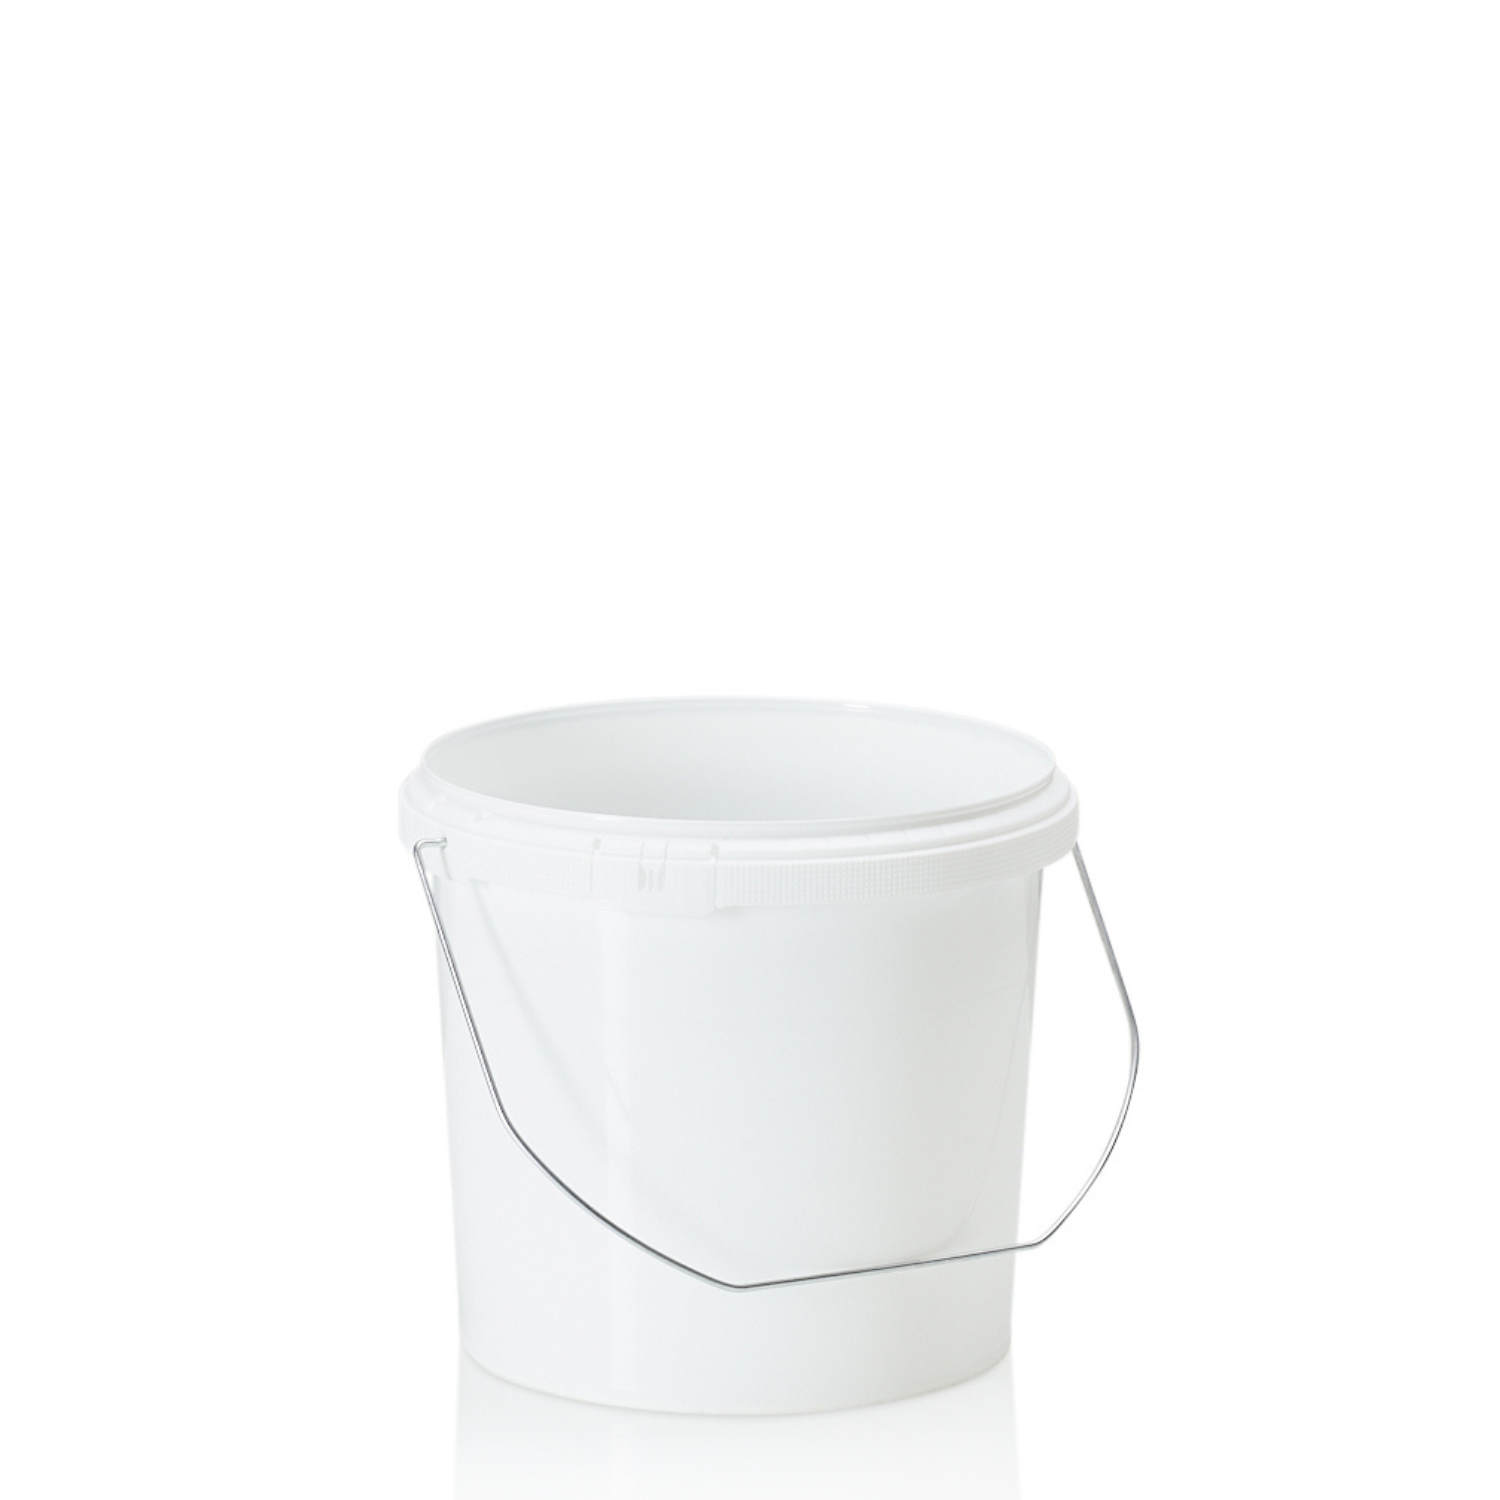 5ltr White PP Tamper Evident Pail with Metal Handle